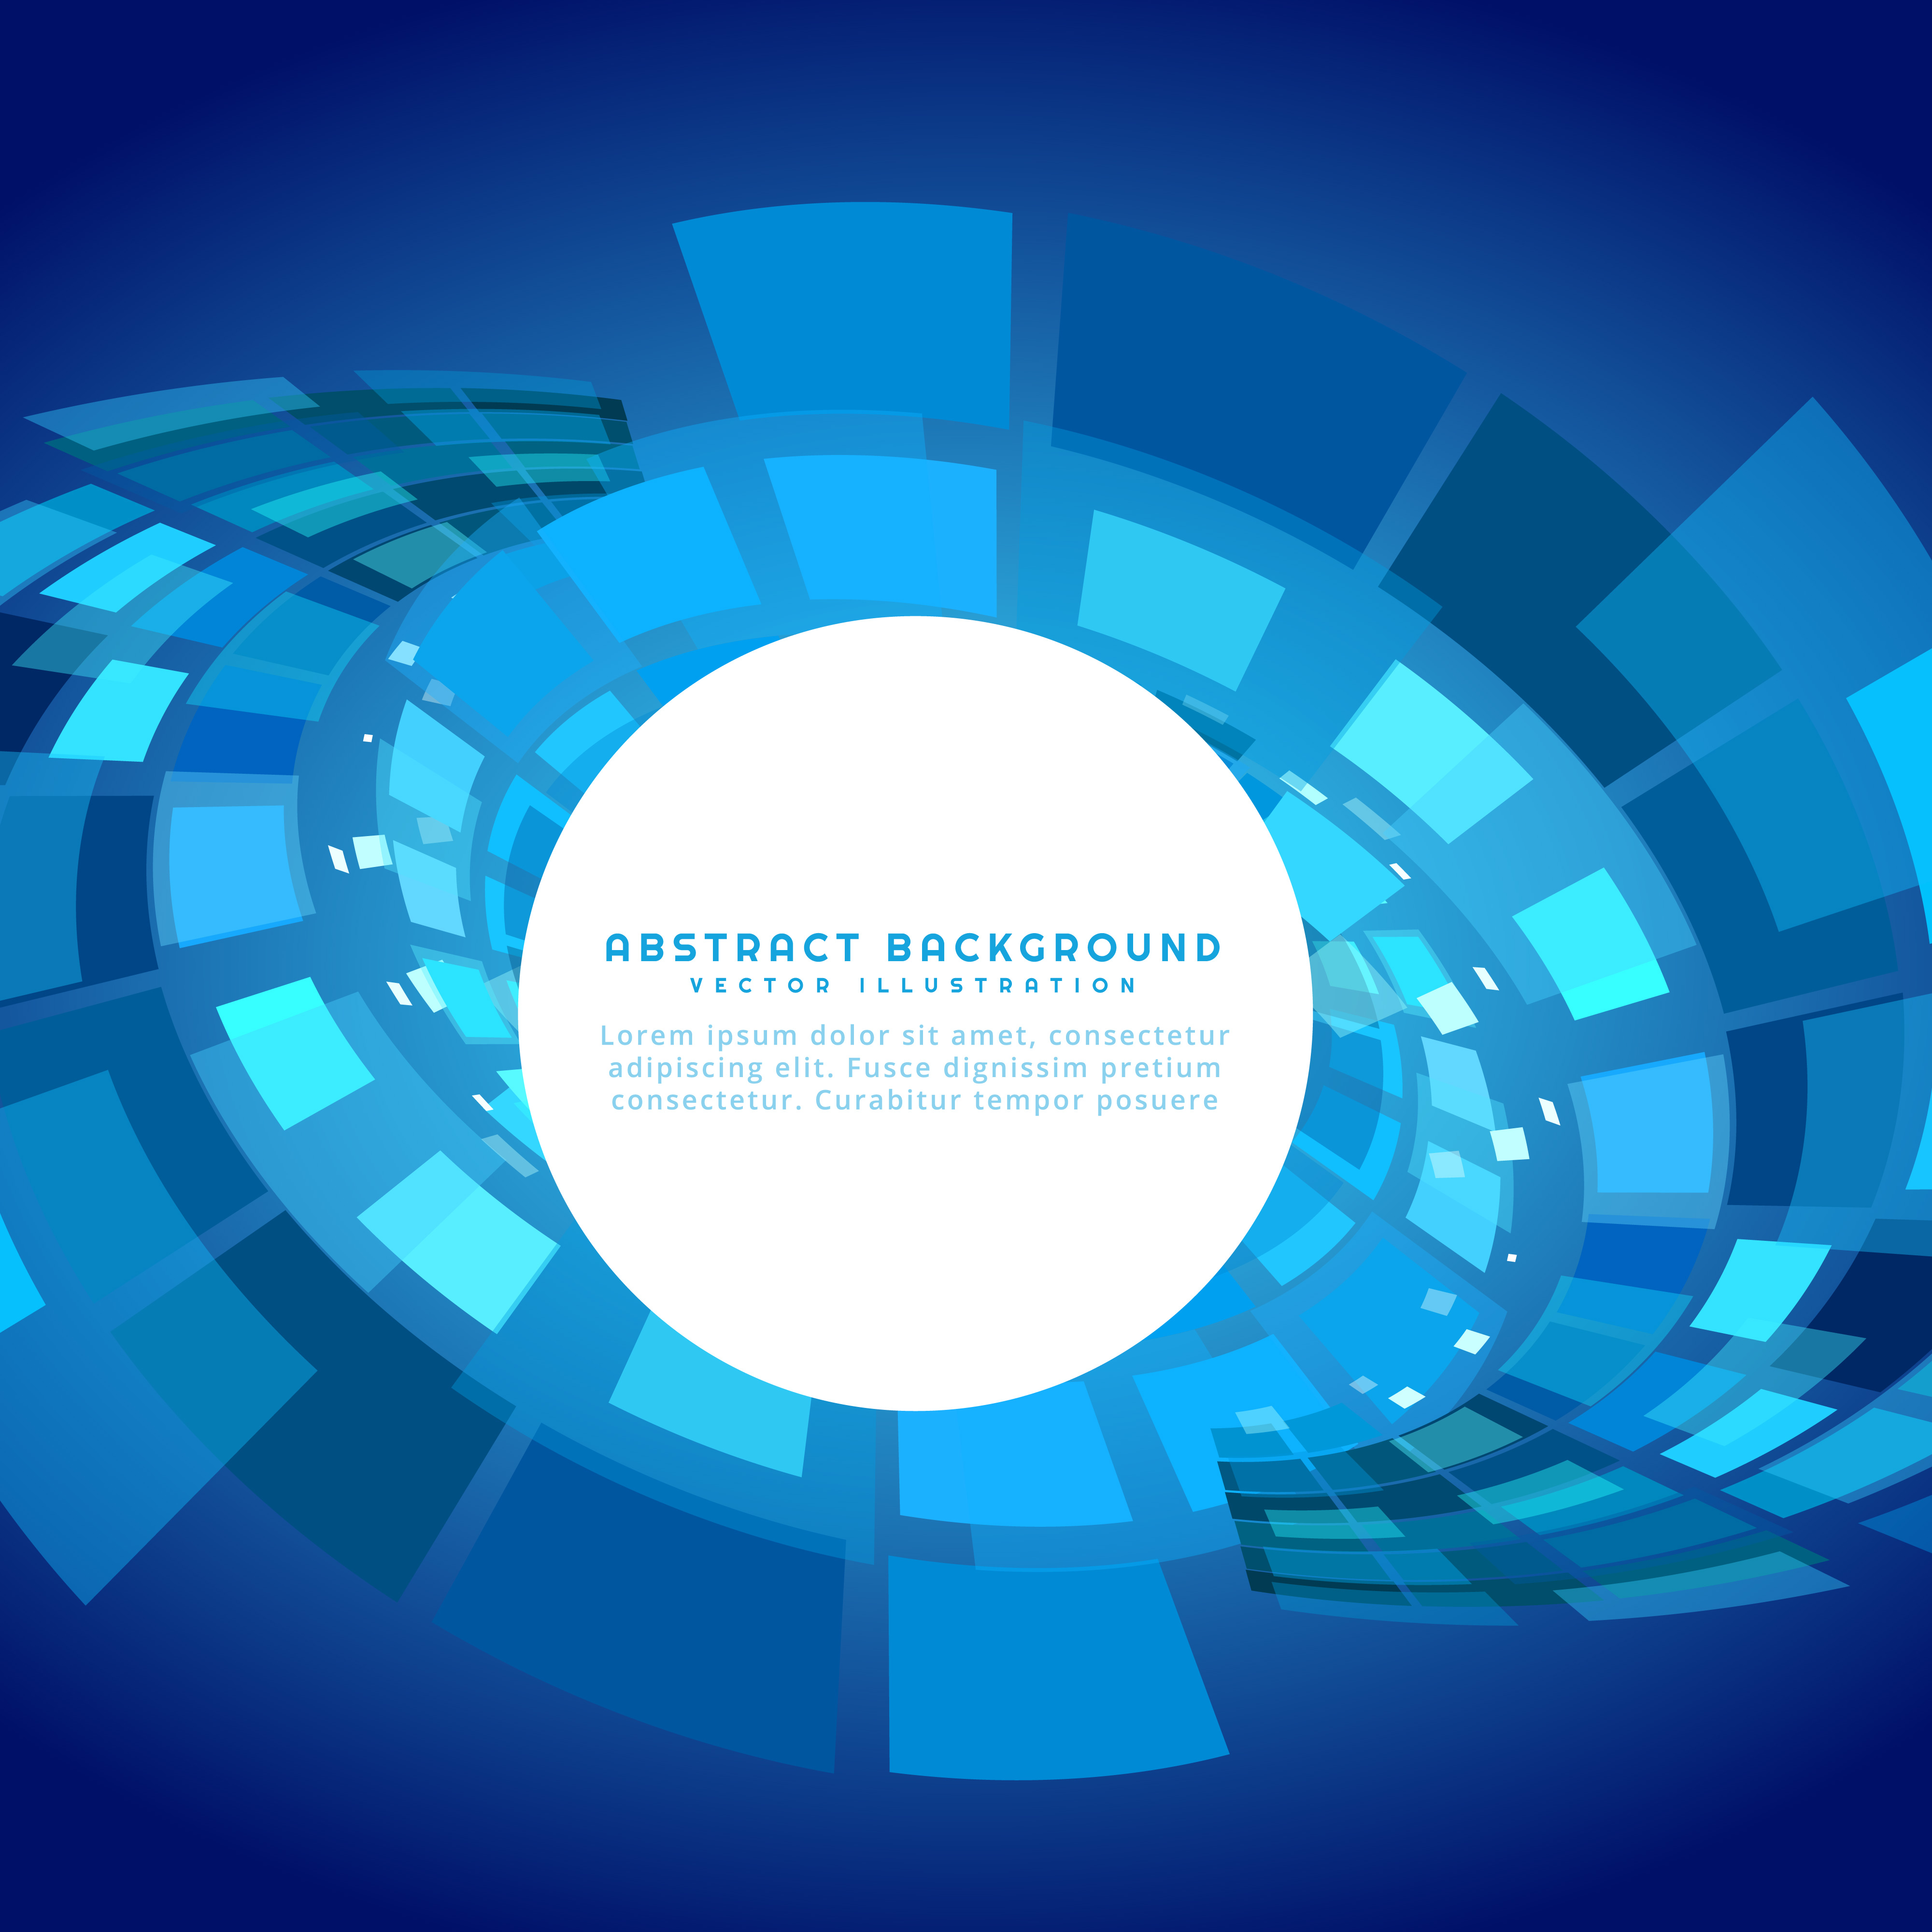 Abstract Technology Background Free Vector Art - (47056 Free Downloads)